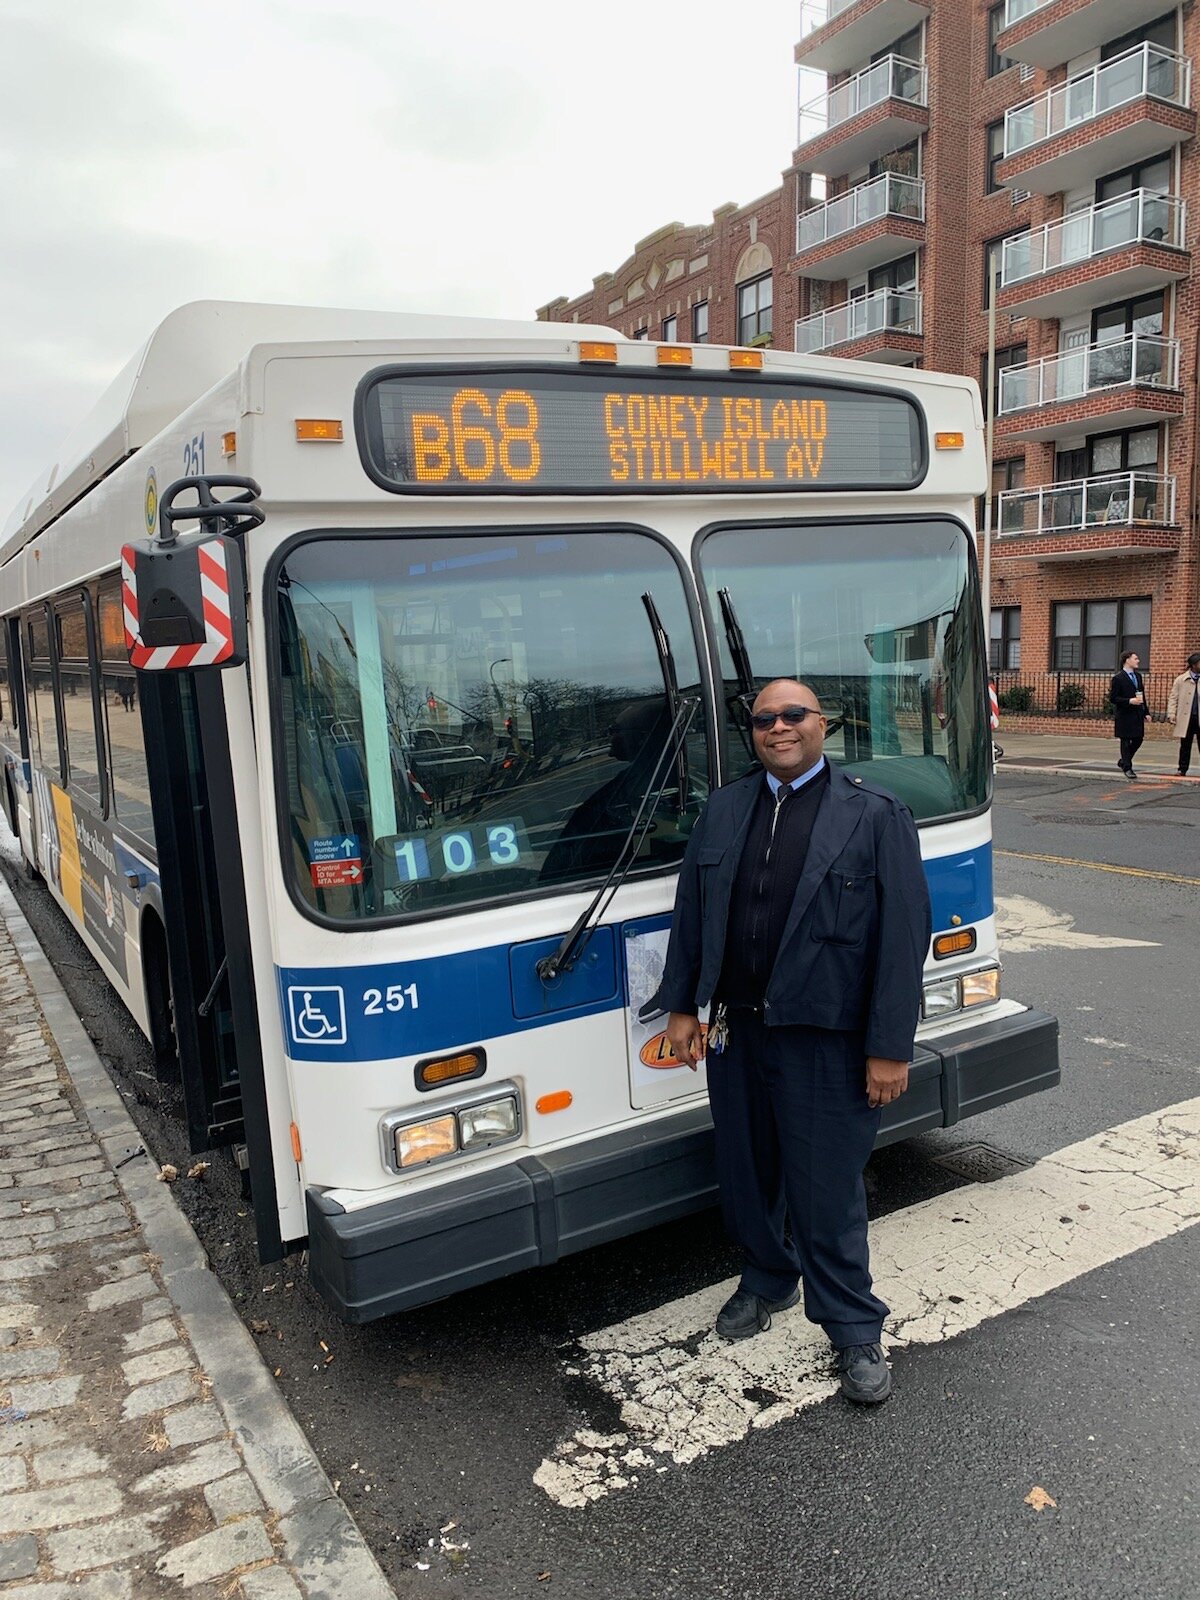 Ron in front of his bus on his current route: the B68.